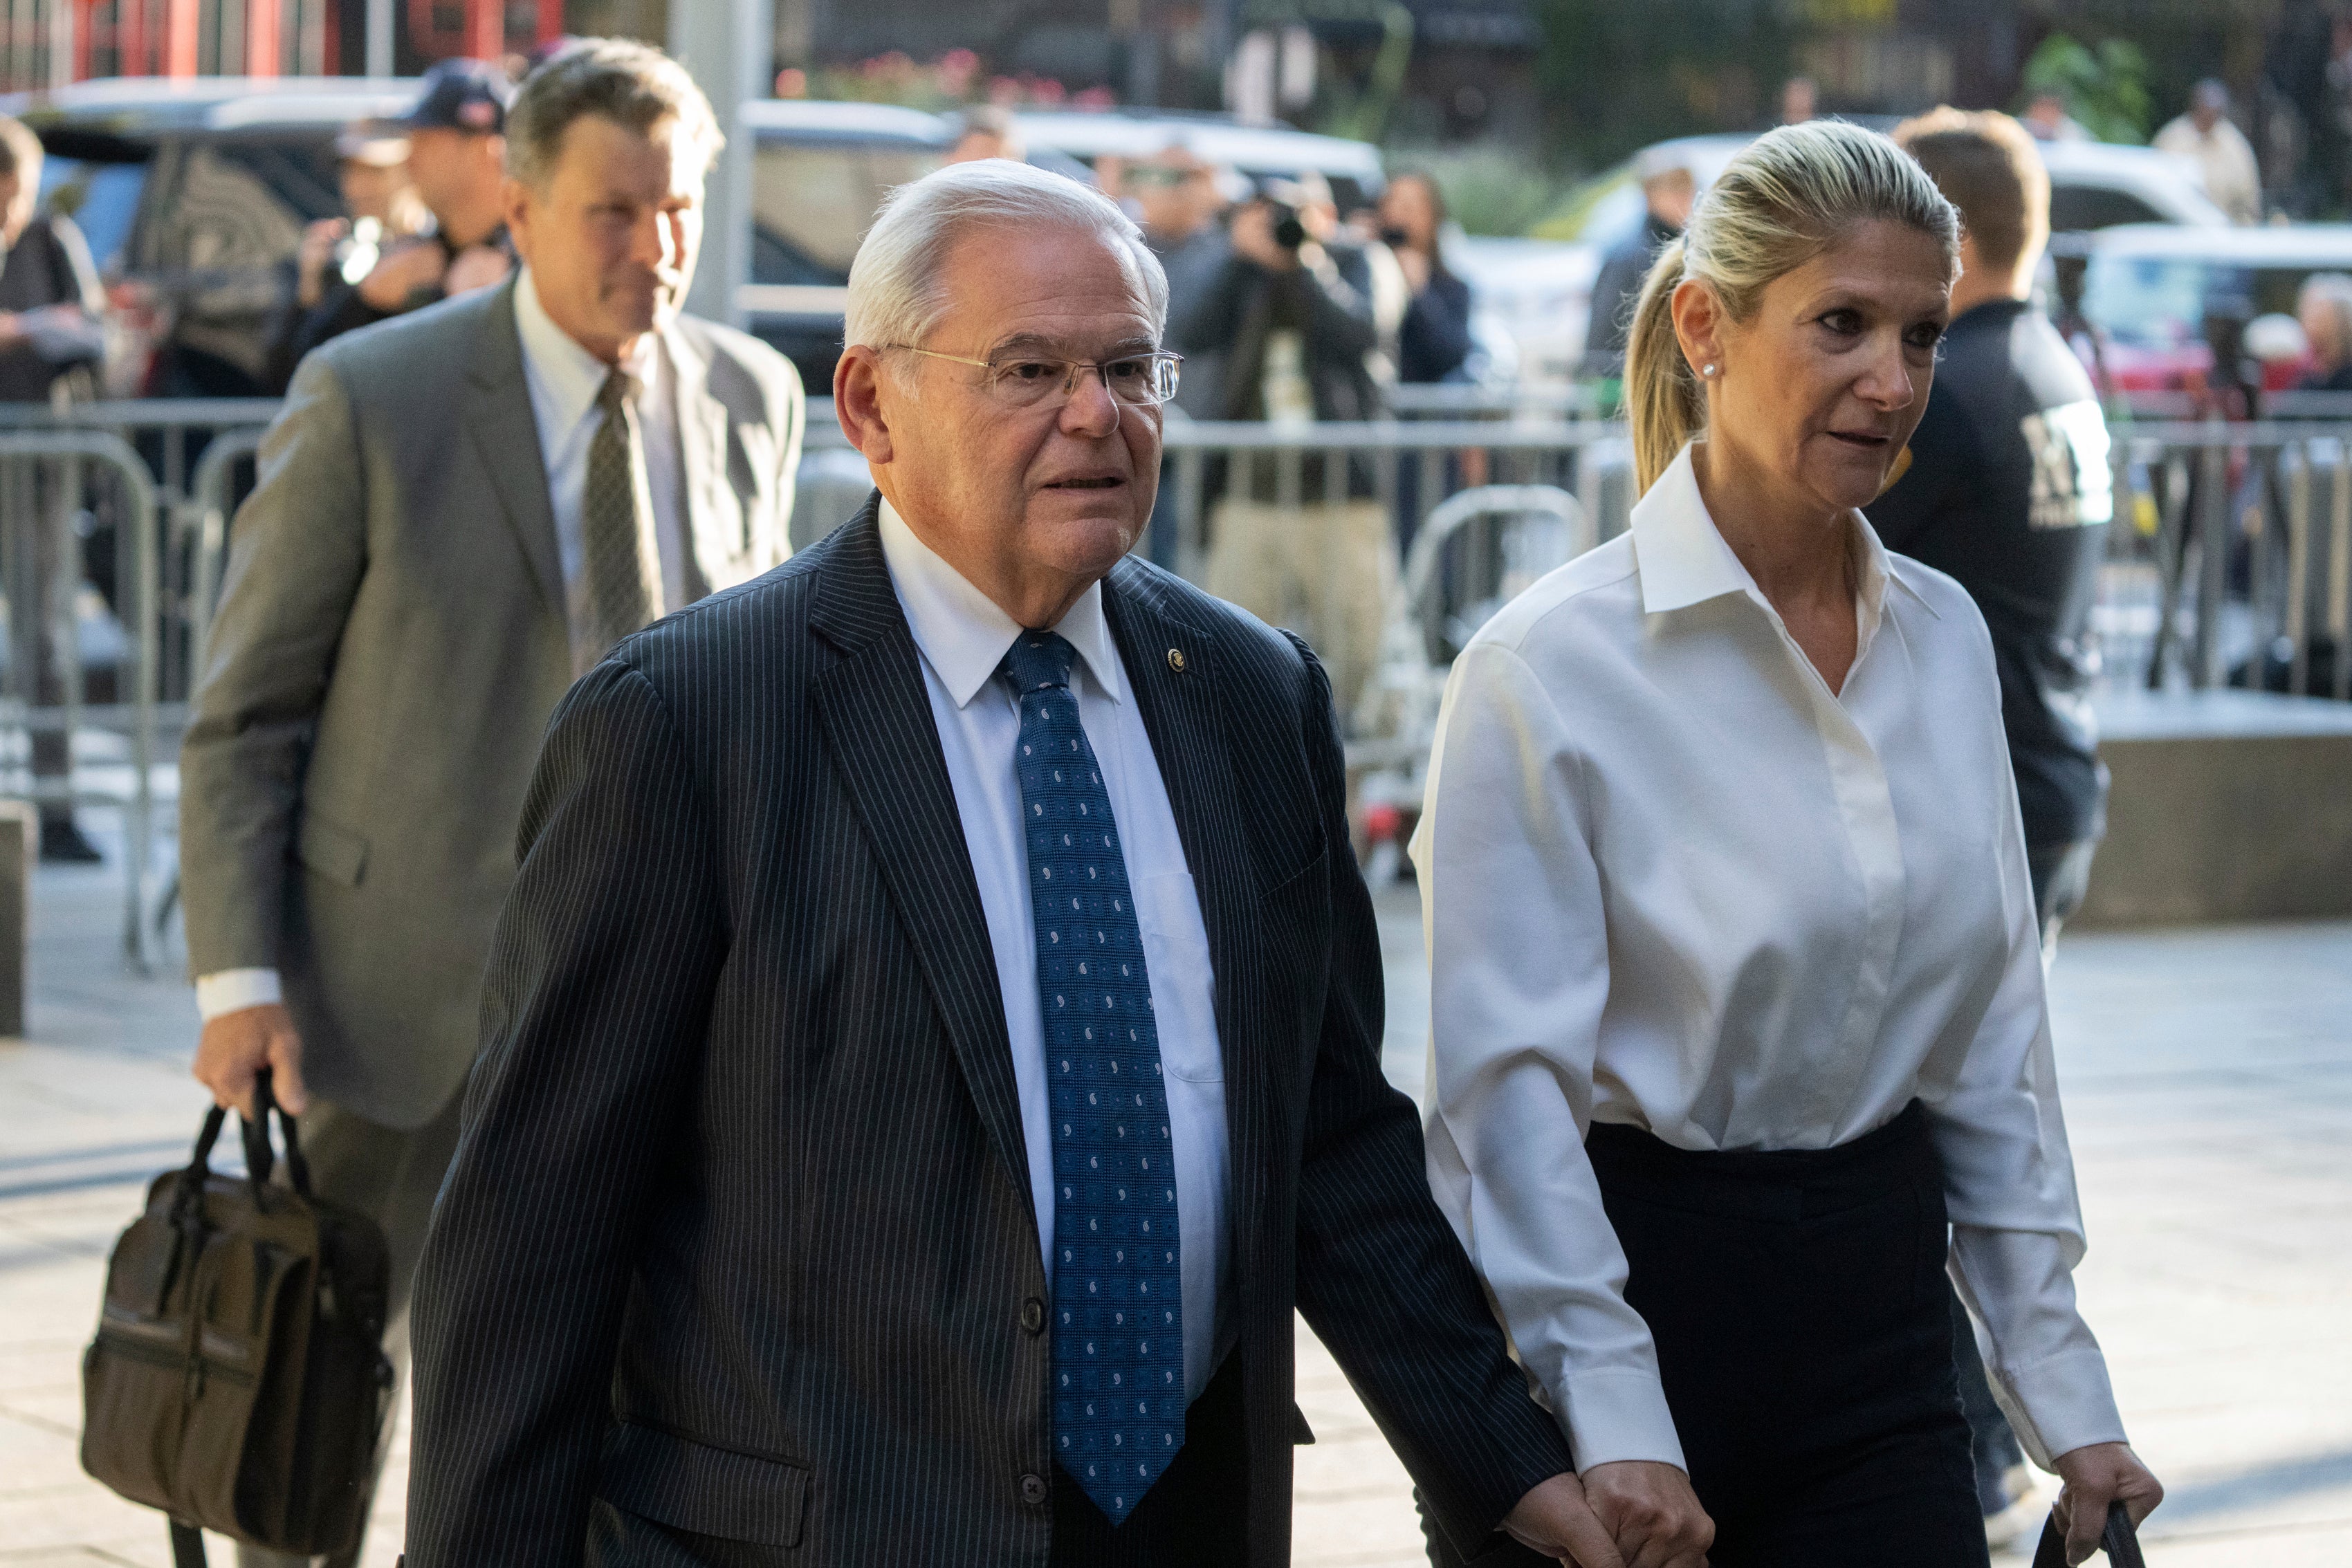 Democratic Senator Bob Menendez of New Jersey, left, and his wife, Nadine Menendez, arrive at the federal courthouse in New York